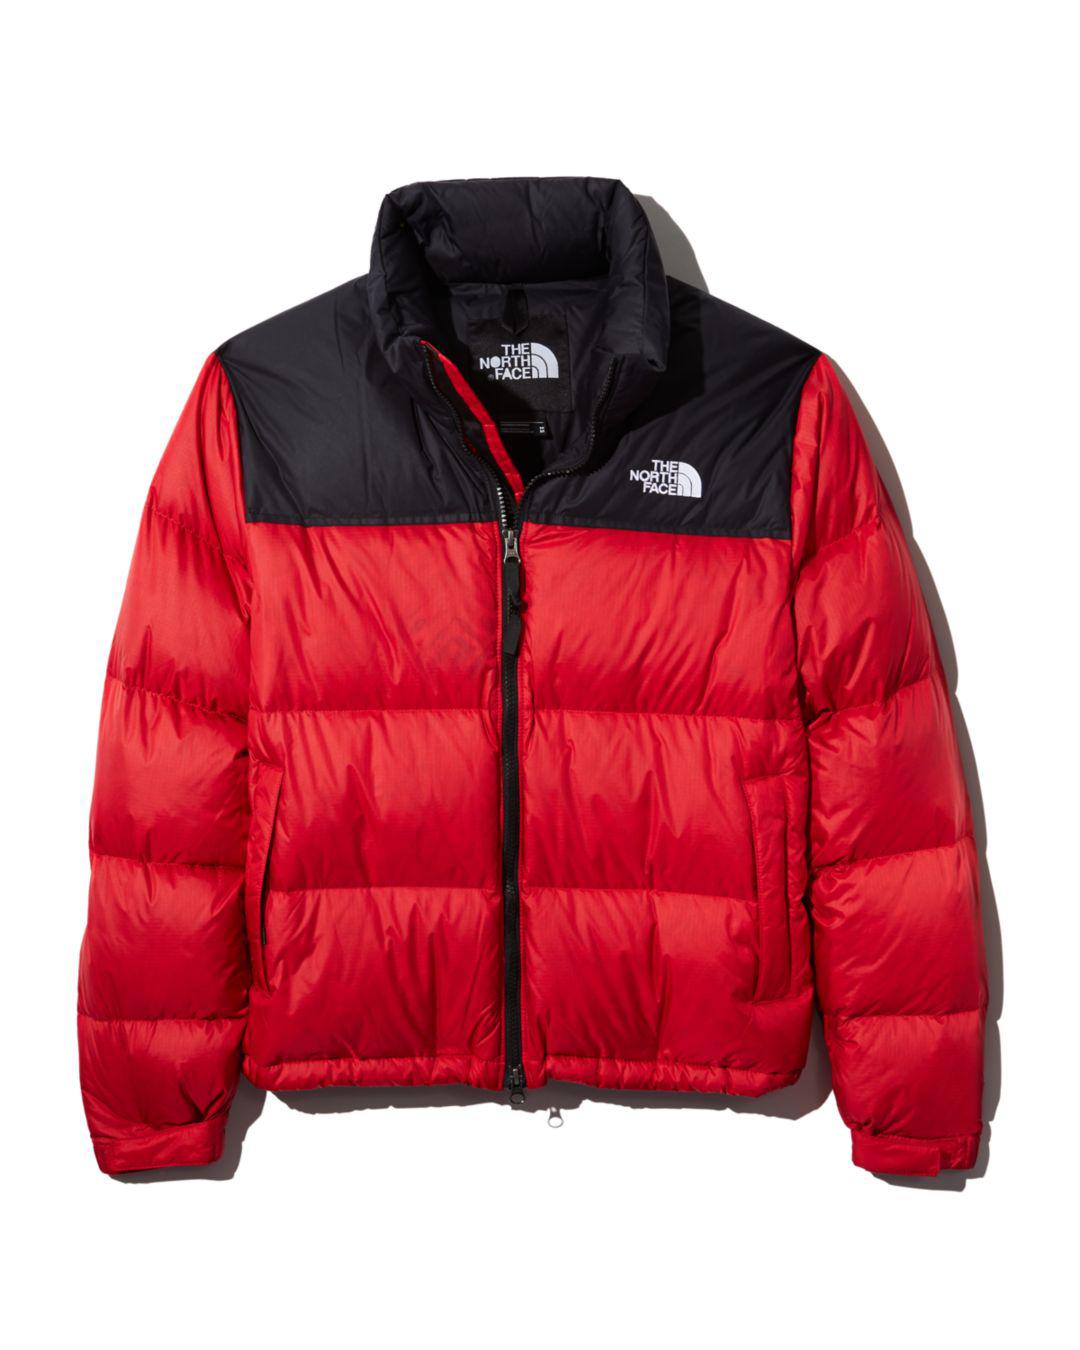 The North Face 1996 Retro Nuptse Jacket in Red | Lyst